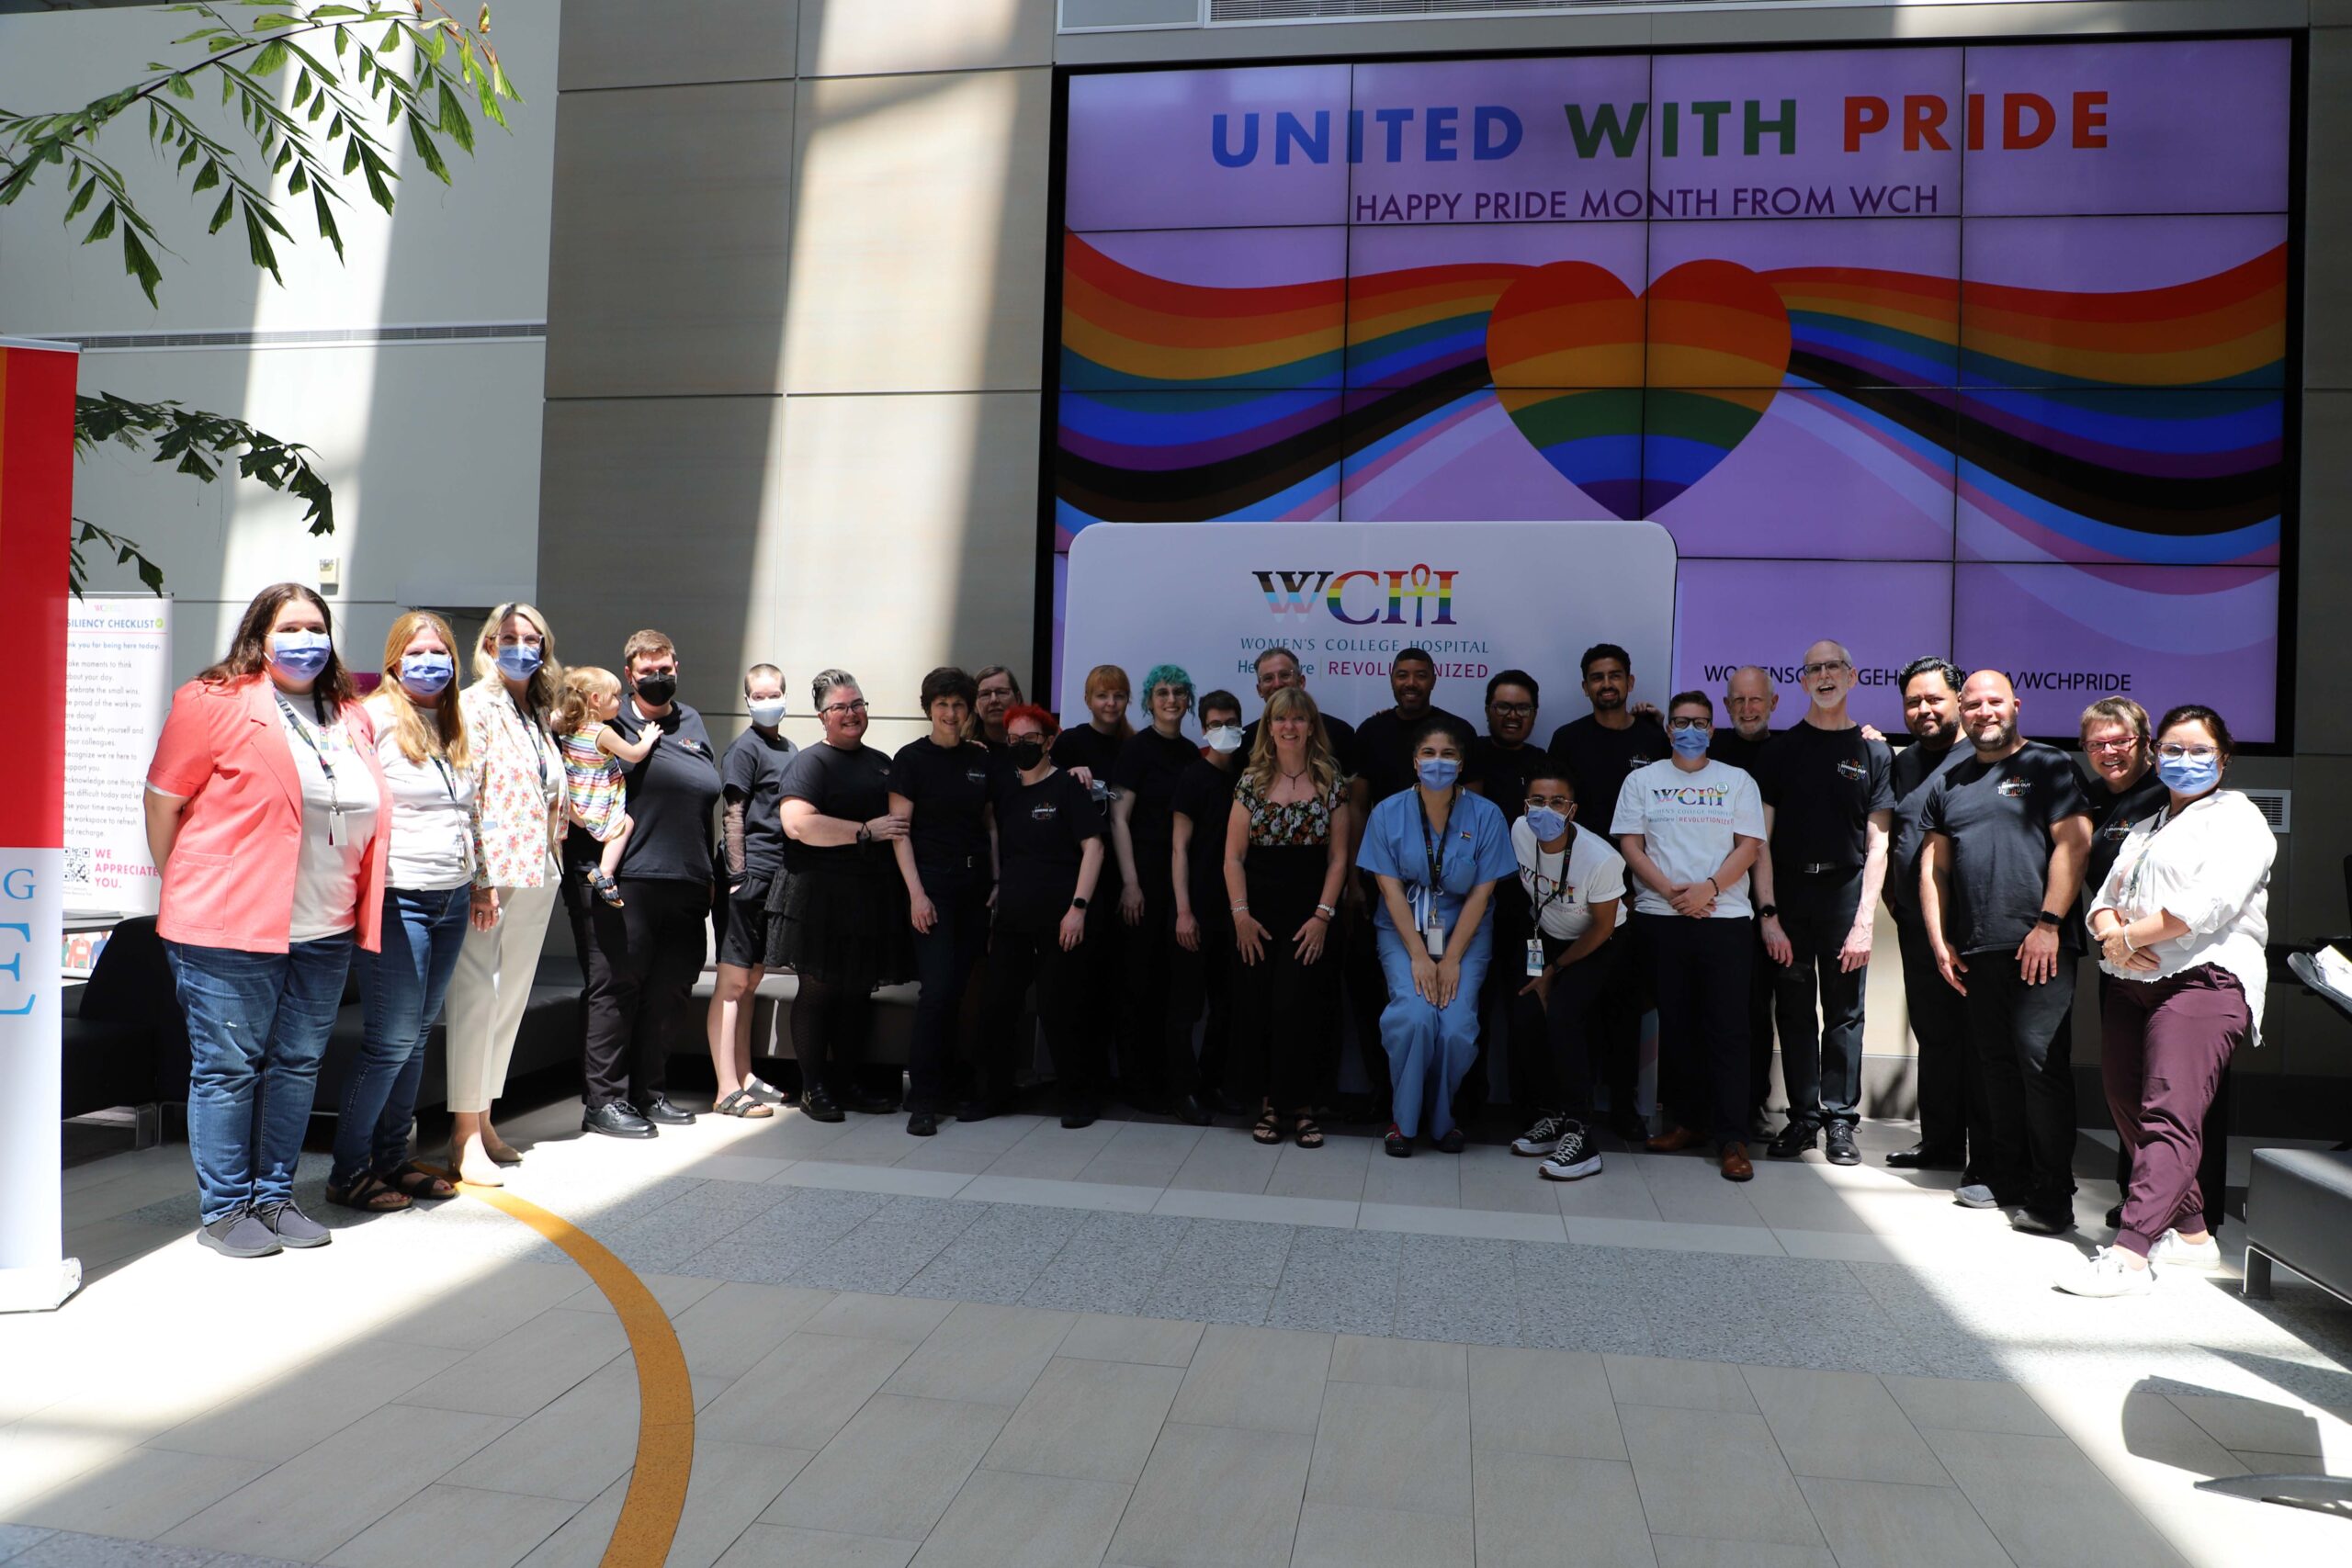 WCH staff and Singing Out: Toronto 2SLGBTQIIA + Choir standing alongside each other smiling